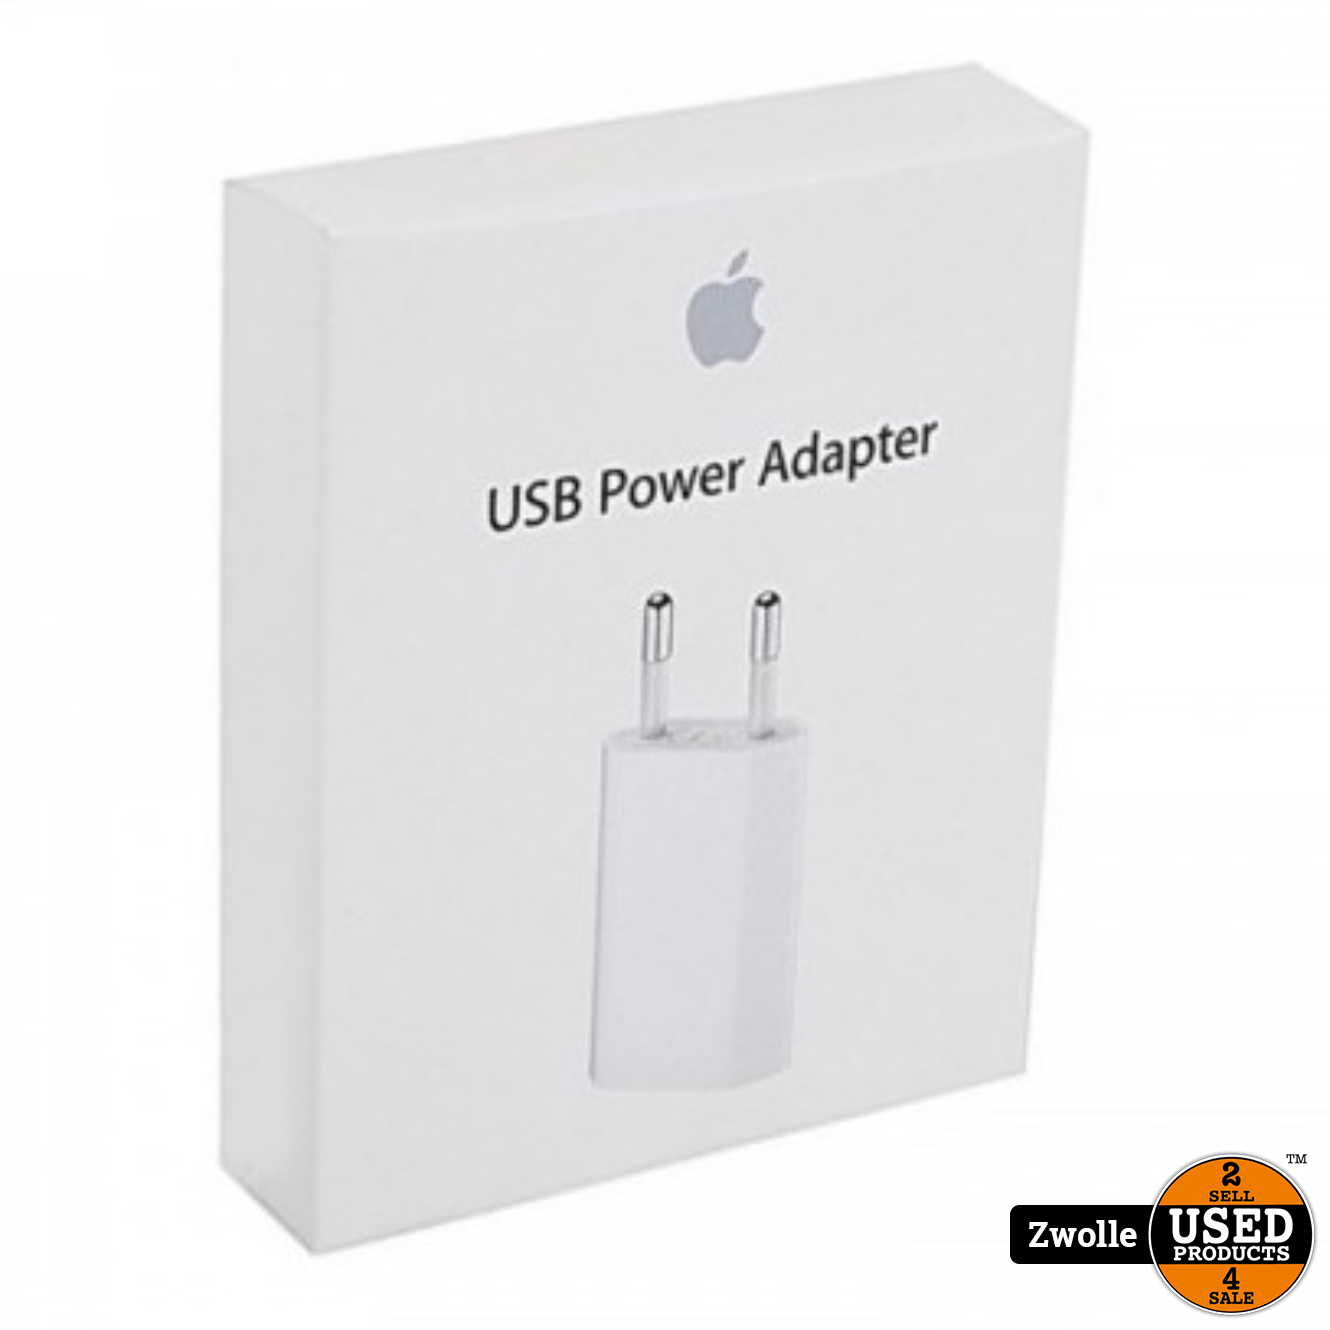 probleem puree Hick Apple iPhone USB Power Adapter 5W - Used Products Zwolle